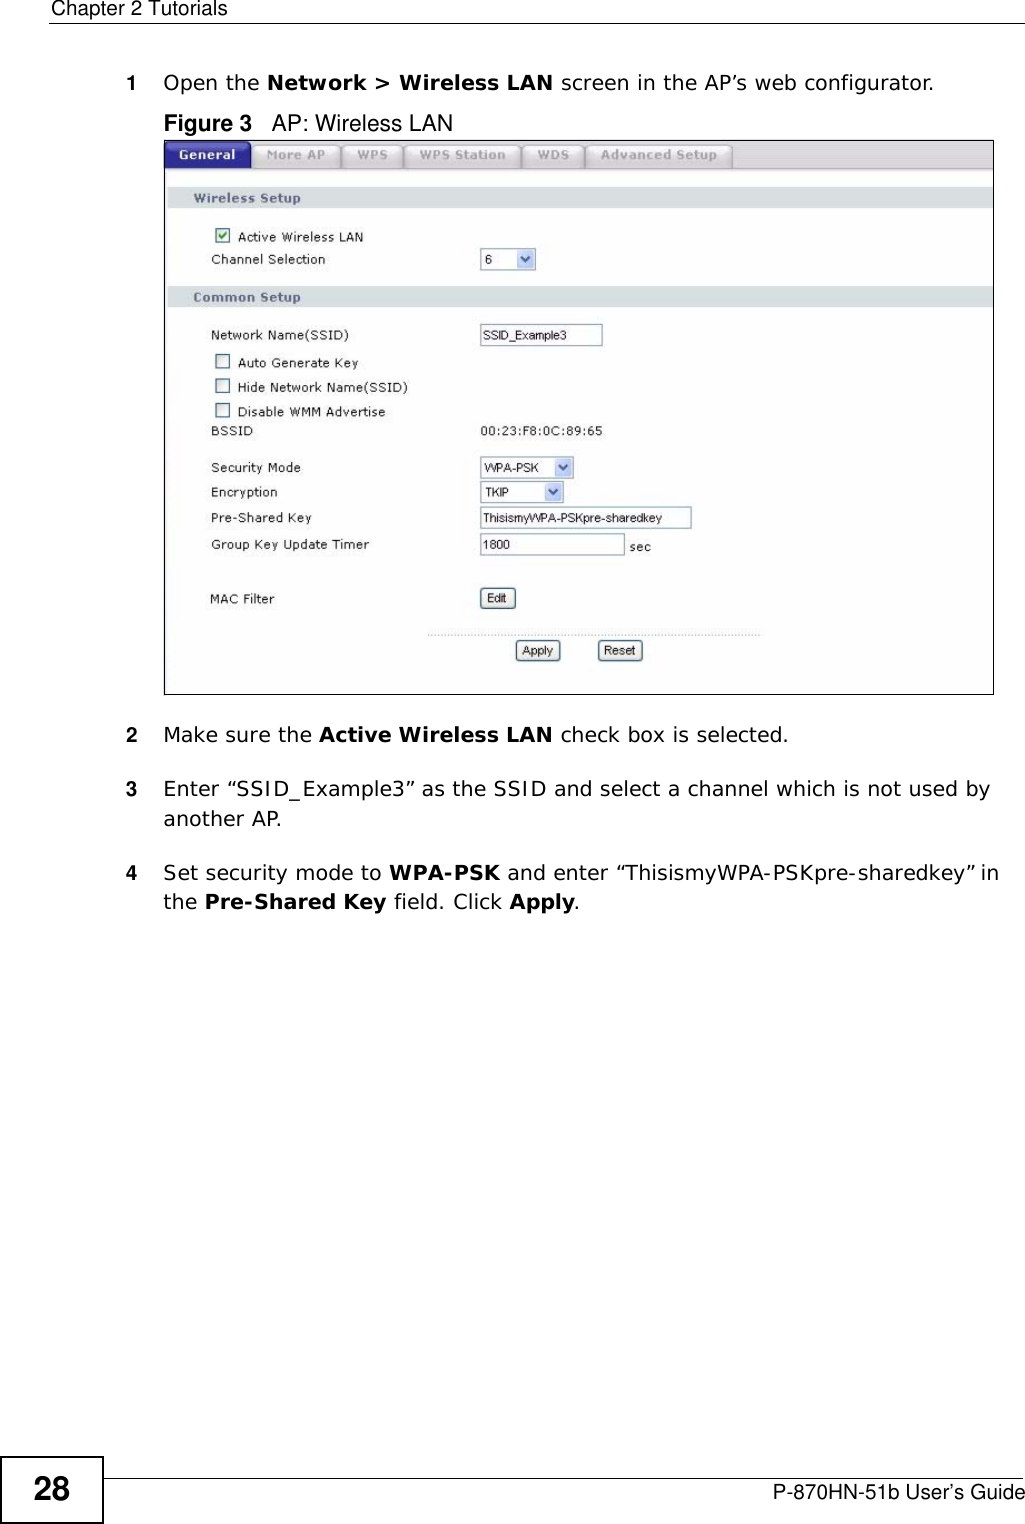 Chapter 2 TutorialsP-870HN-51b User’s Guide281Open the Network &gt; Wireless LAN screen in the AP’s web configurator.Figure 3   AP: Wireless LAN 2Make sure the Active Wireless LAN check box is selected.3Enter “SSID_Example3” as the SSID and select a channel which is not used by another AP.4Set security mode to WPA-PSK and enter “ThisismyWPA-PSKpre-sharedkey” in the Pre-Shared Key field. Click Apply.